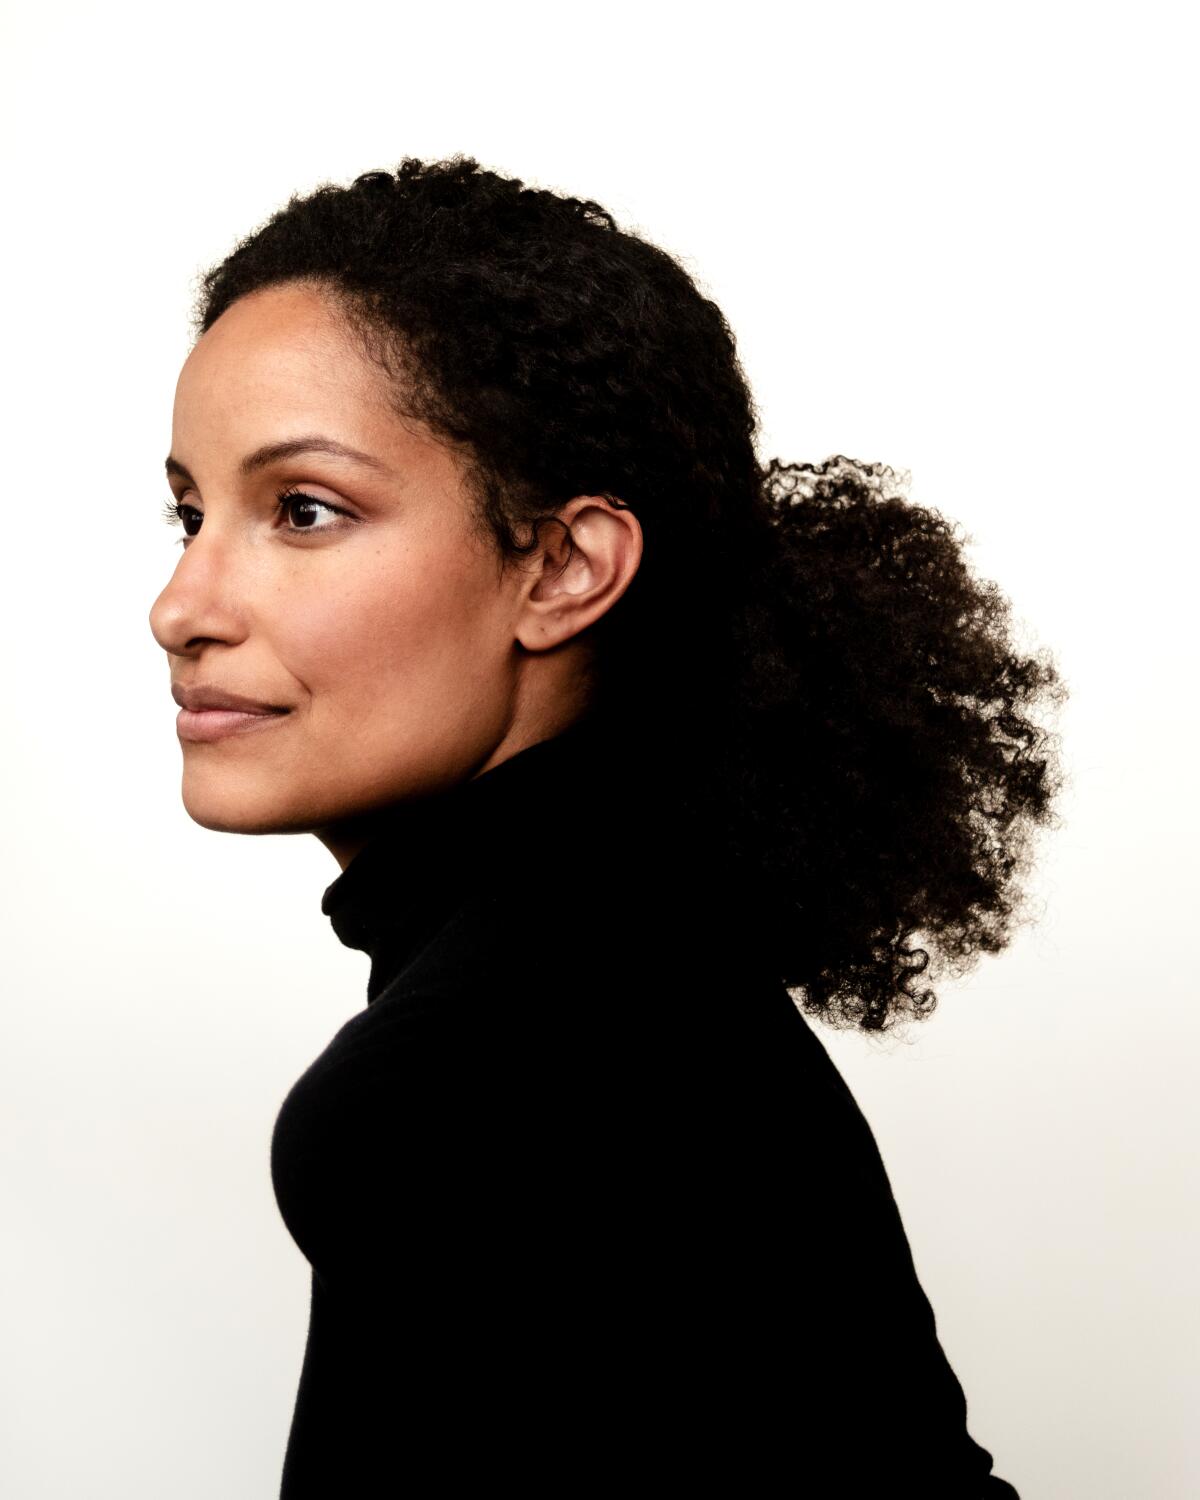 Author Kiley Reid, in a black turtleneck, smiles with her head turned to the side.